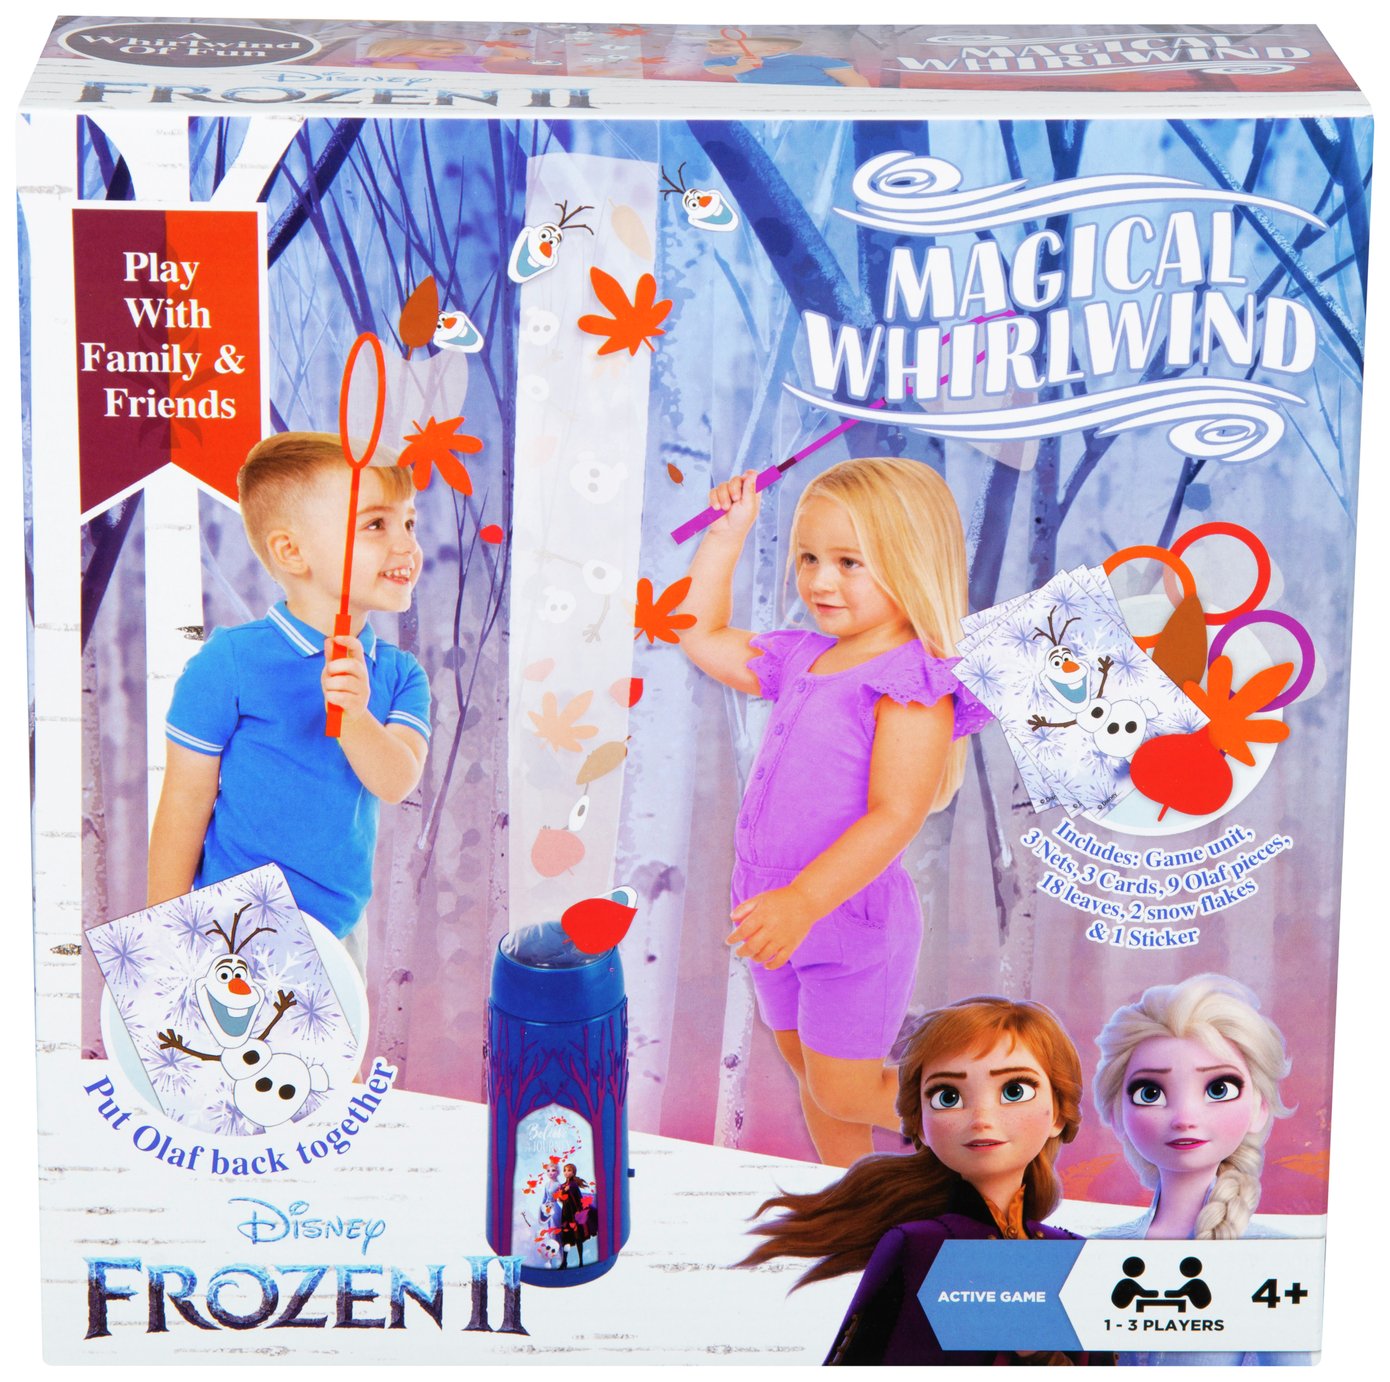 Disney Frozen 2 Magical Whirlwind Game Review